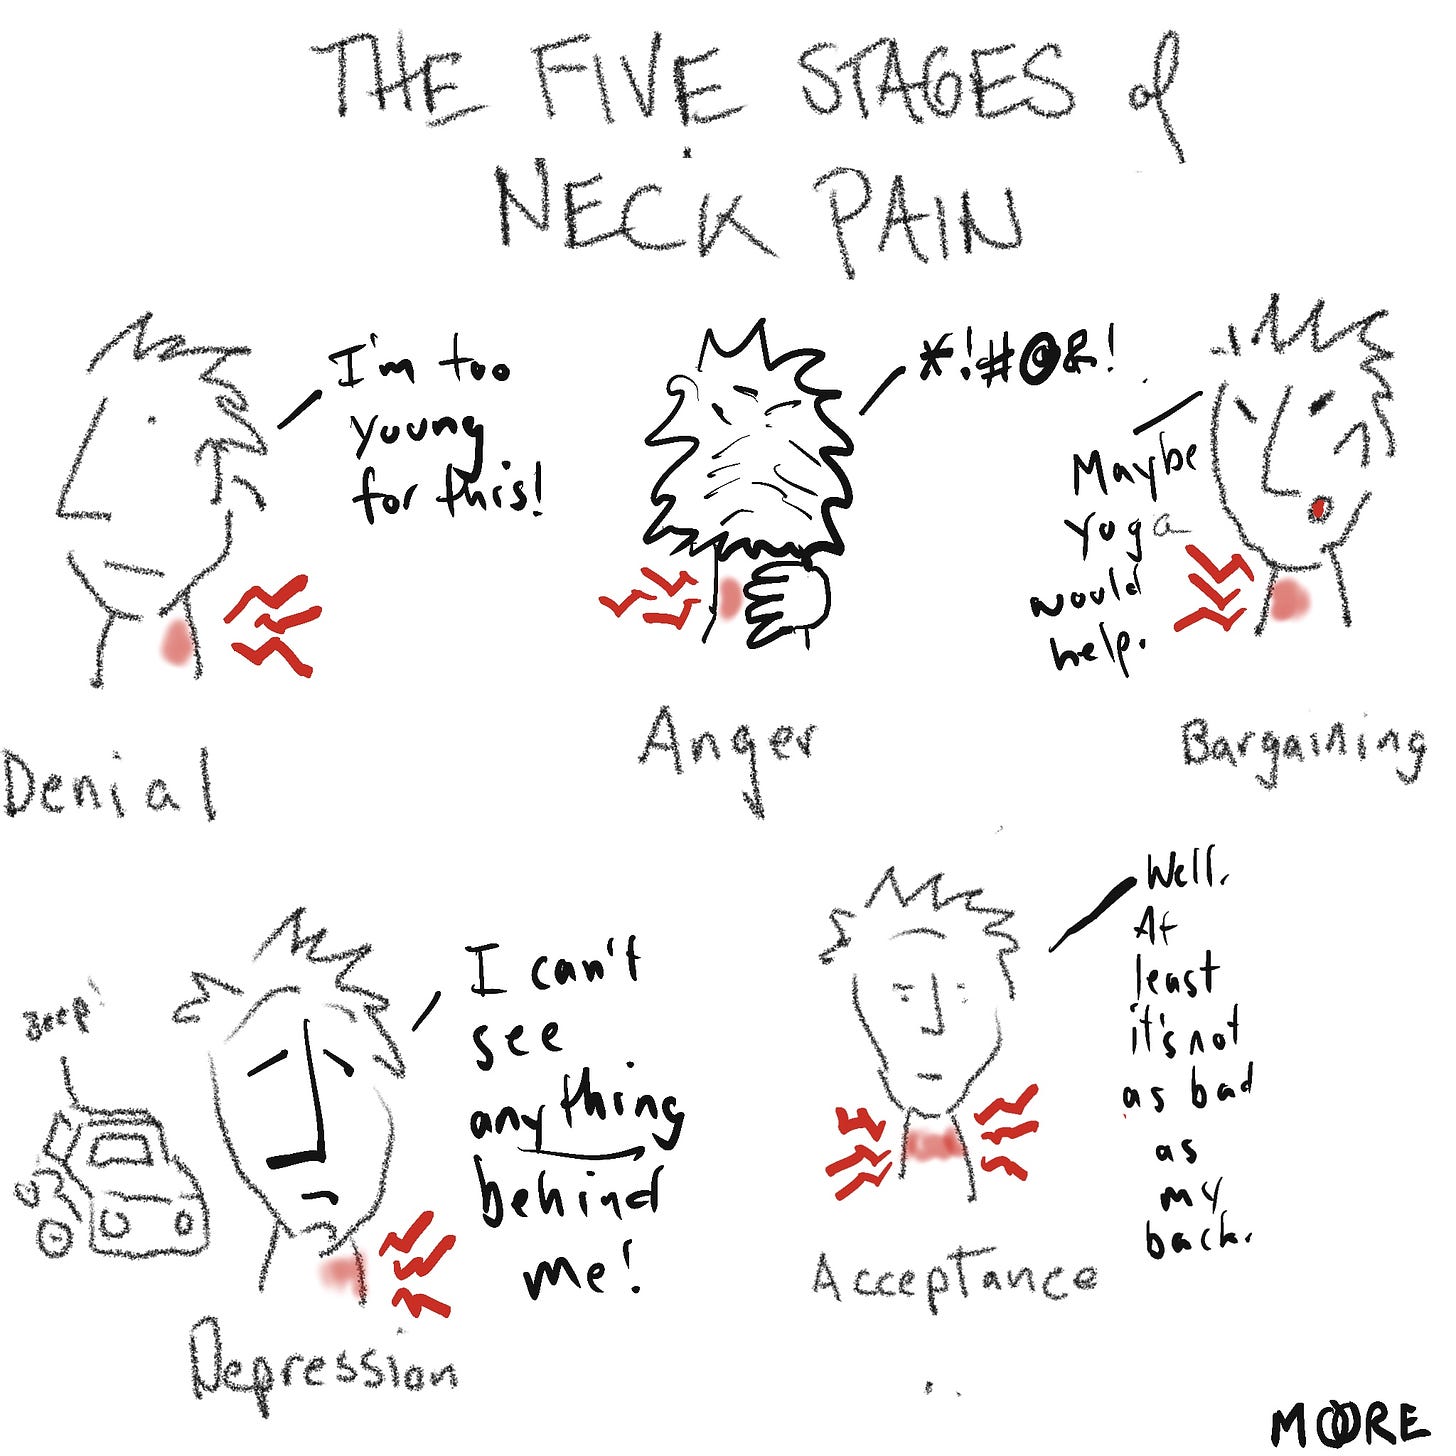 The five stages of neck pain